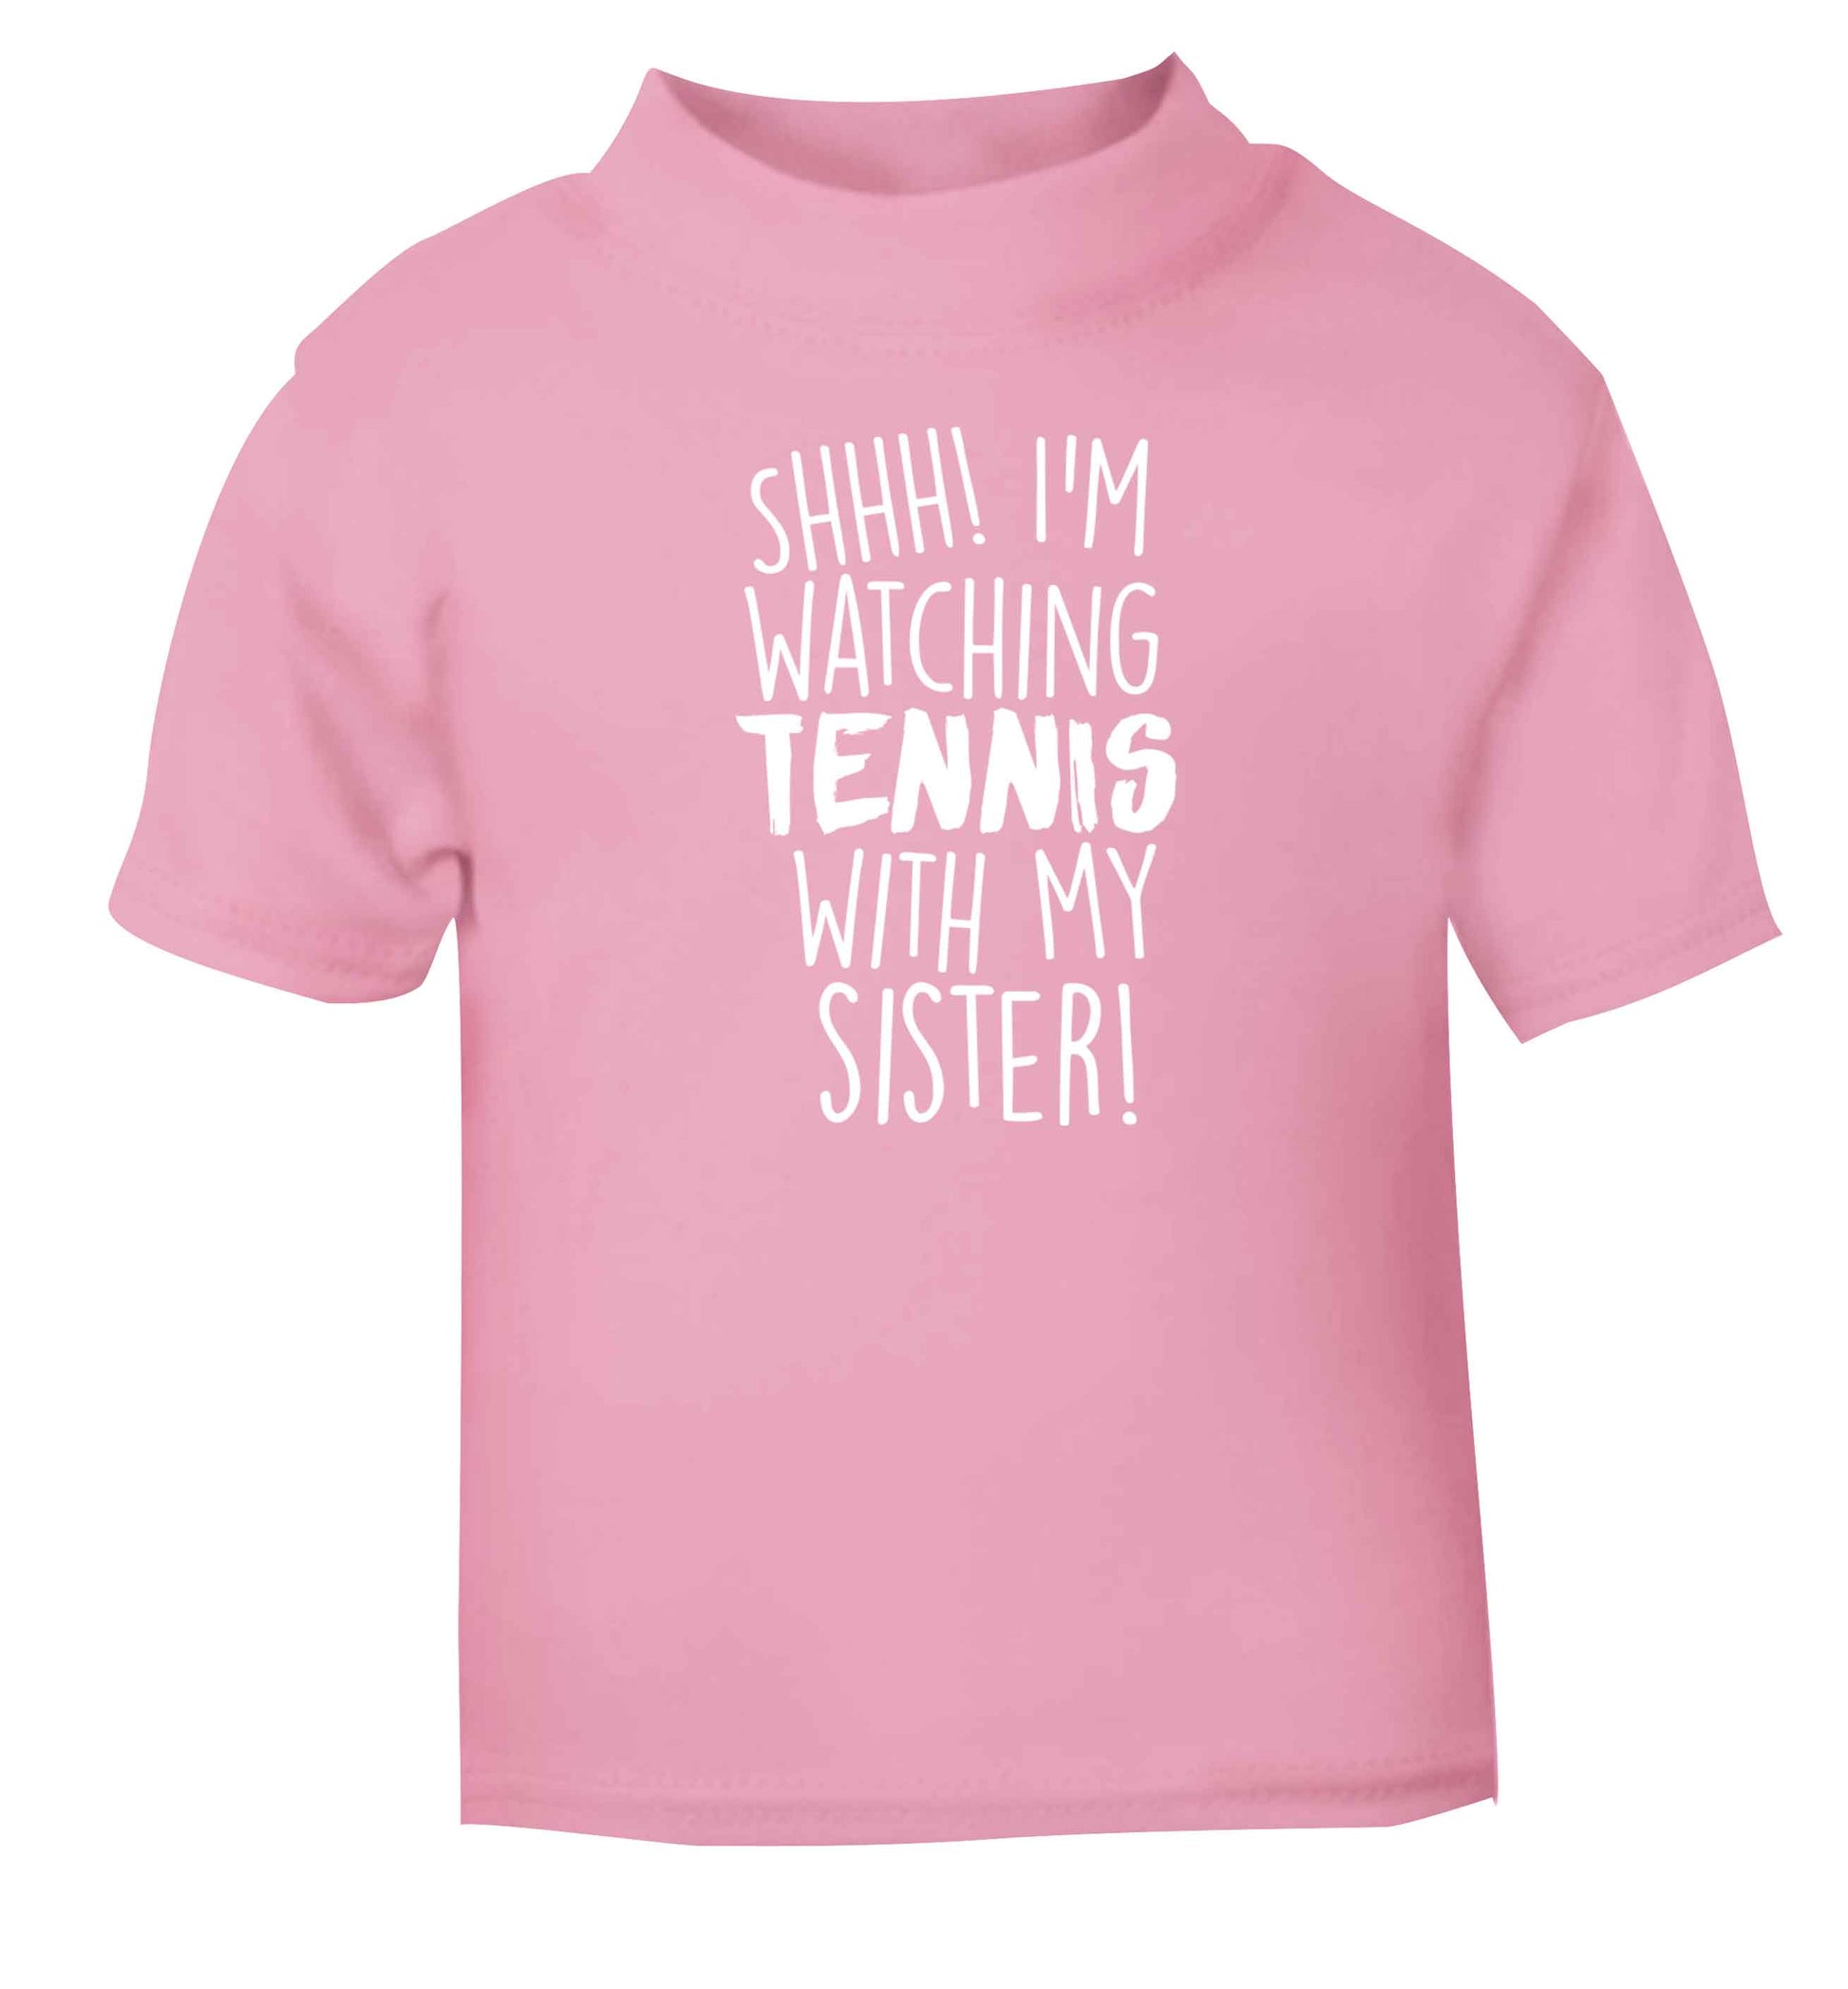 Shh! I'm watching tennis with my sister! light pink Baby Toddler Tshirt 2 Years